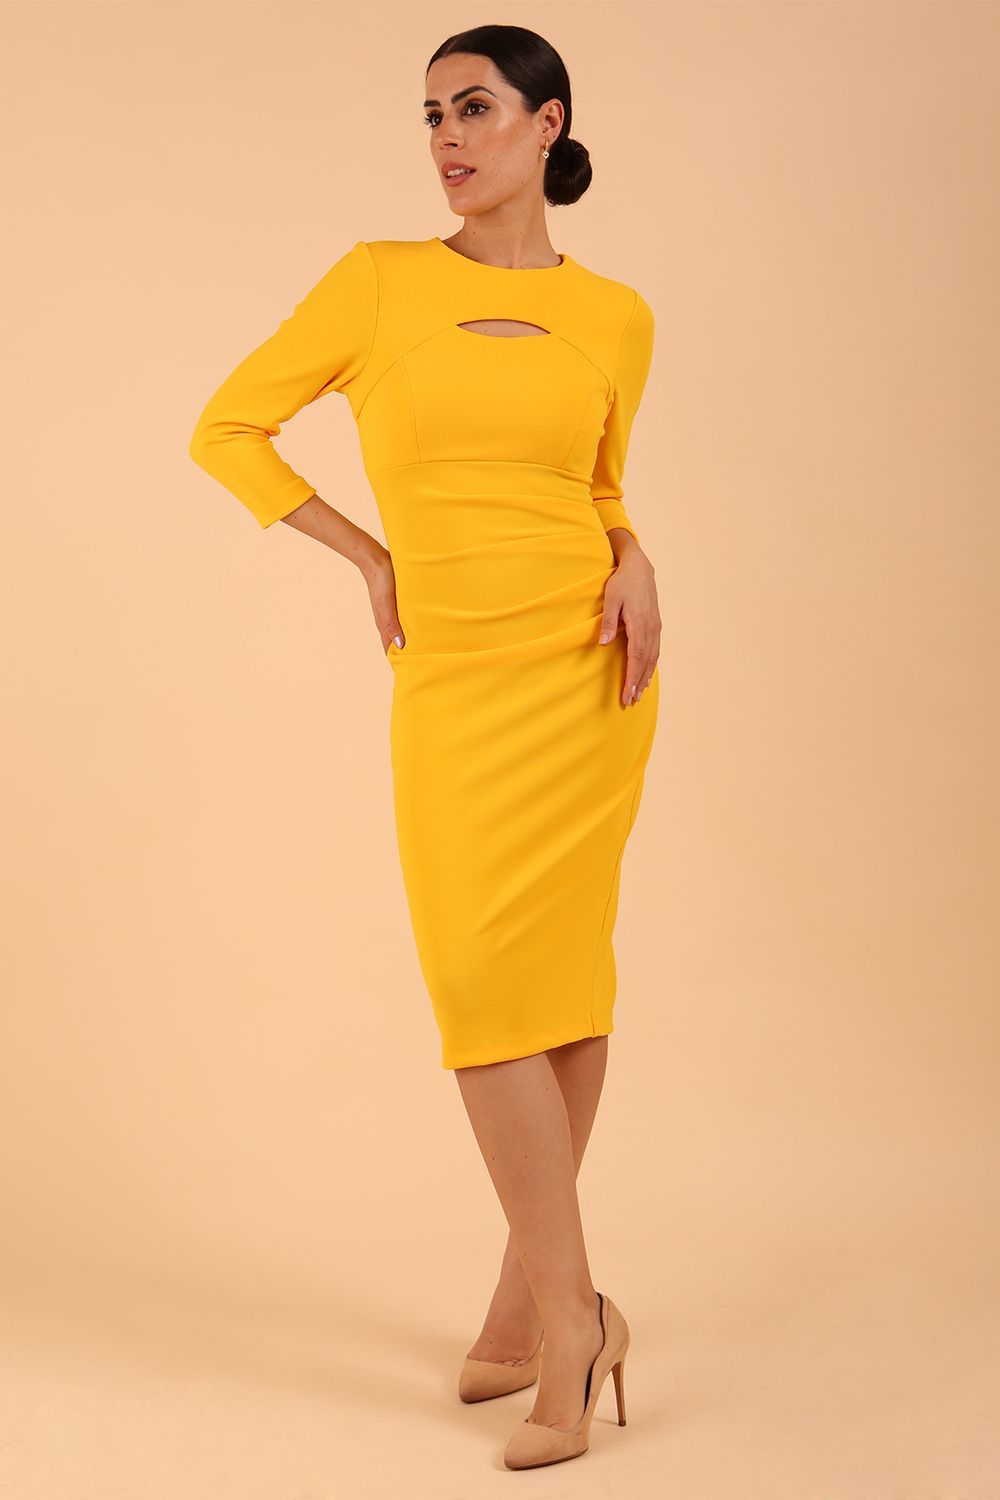 Model wearing a Clementine Keyhole Sleeved Pencil Dress in Sunshine Yellow colour